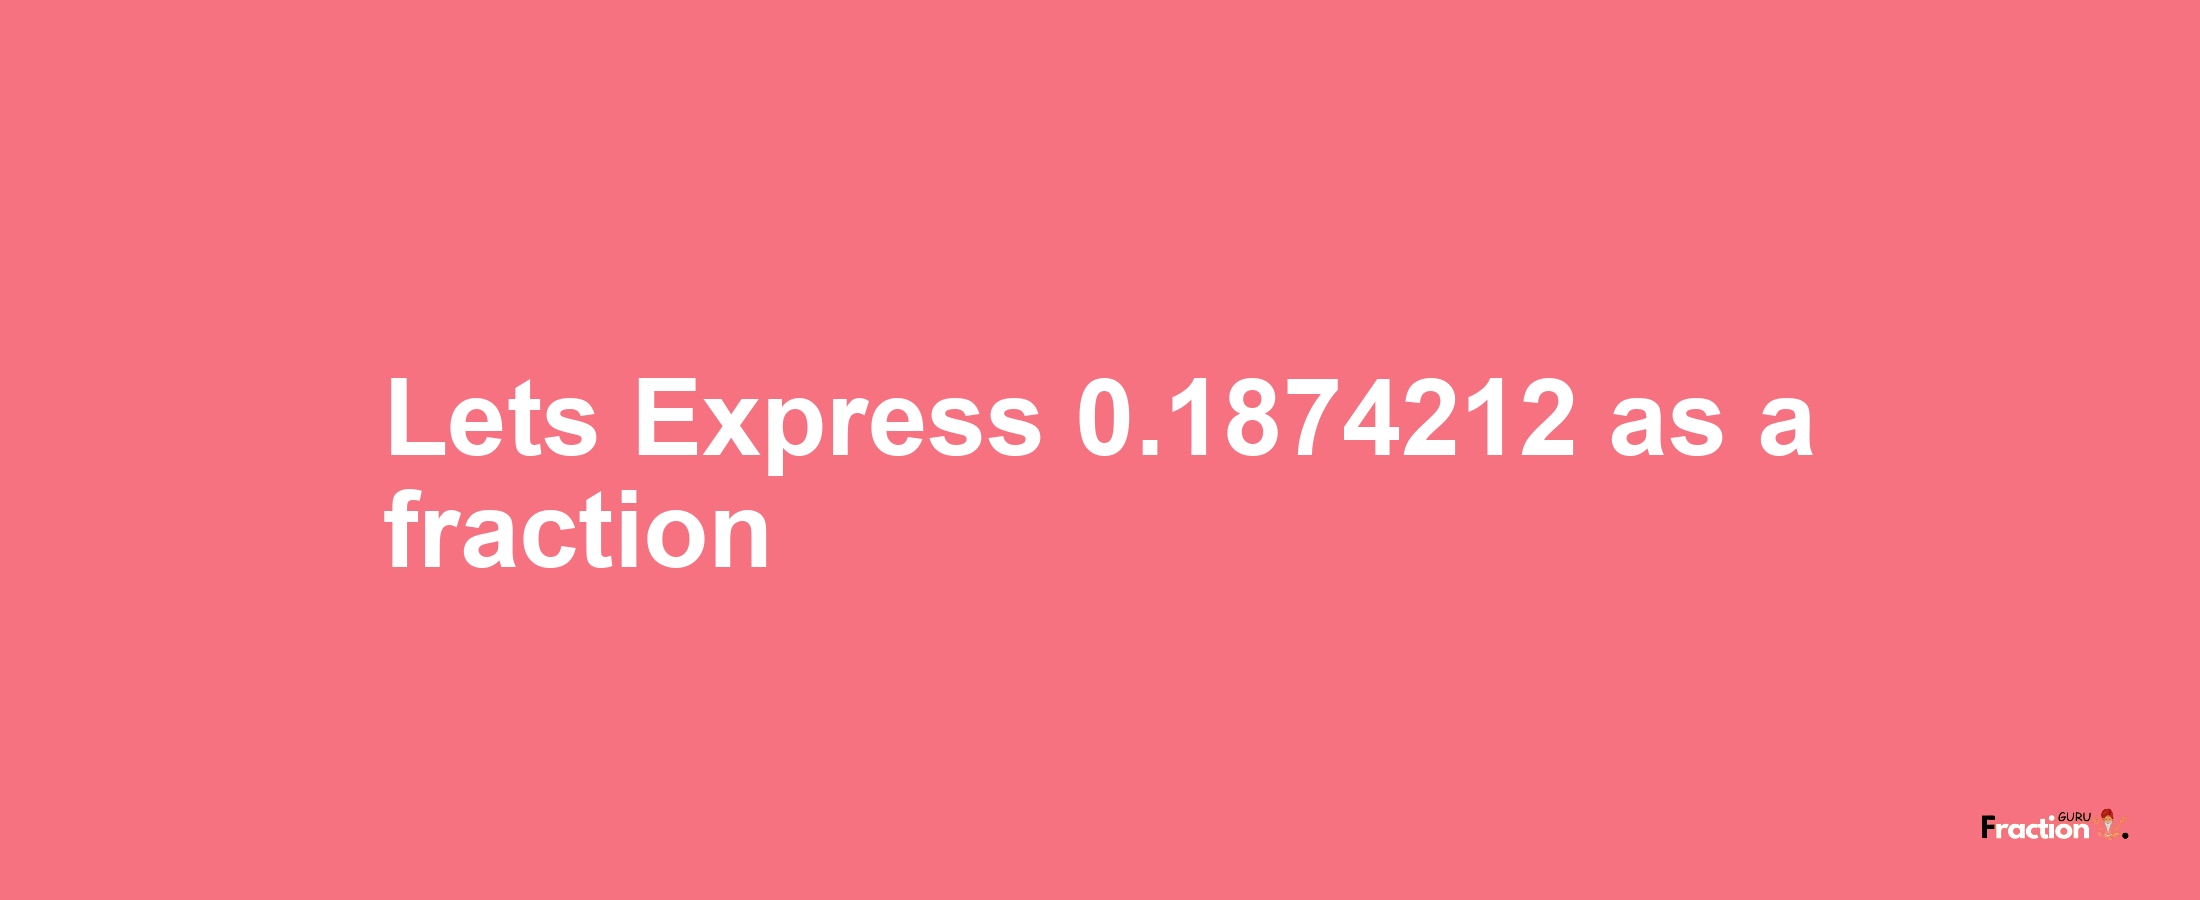 Lets Express 0.1874212 as afraction